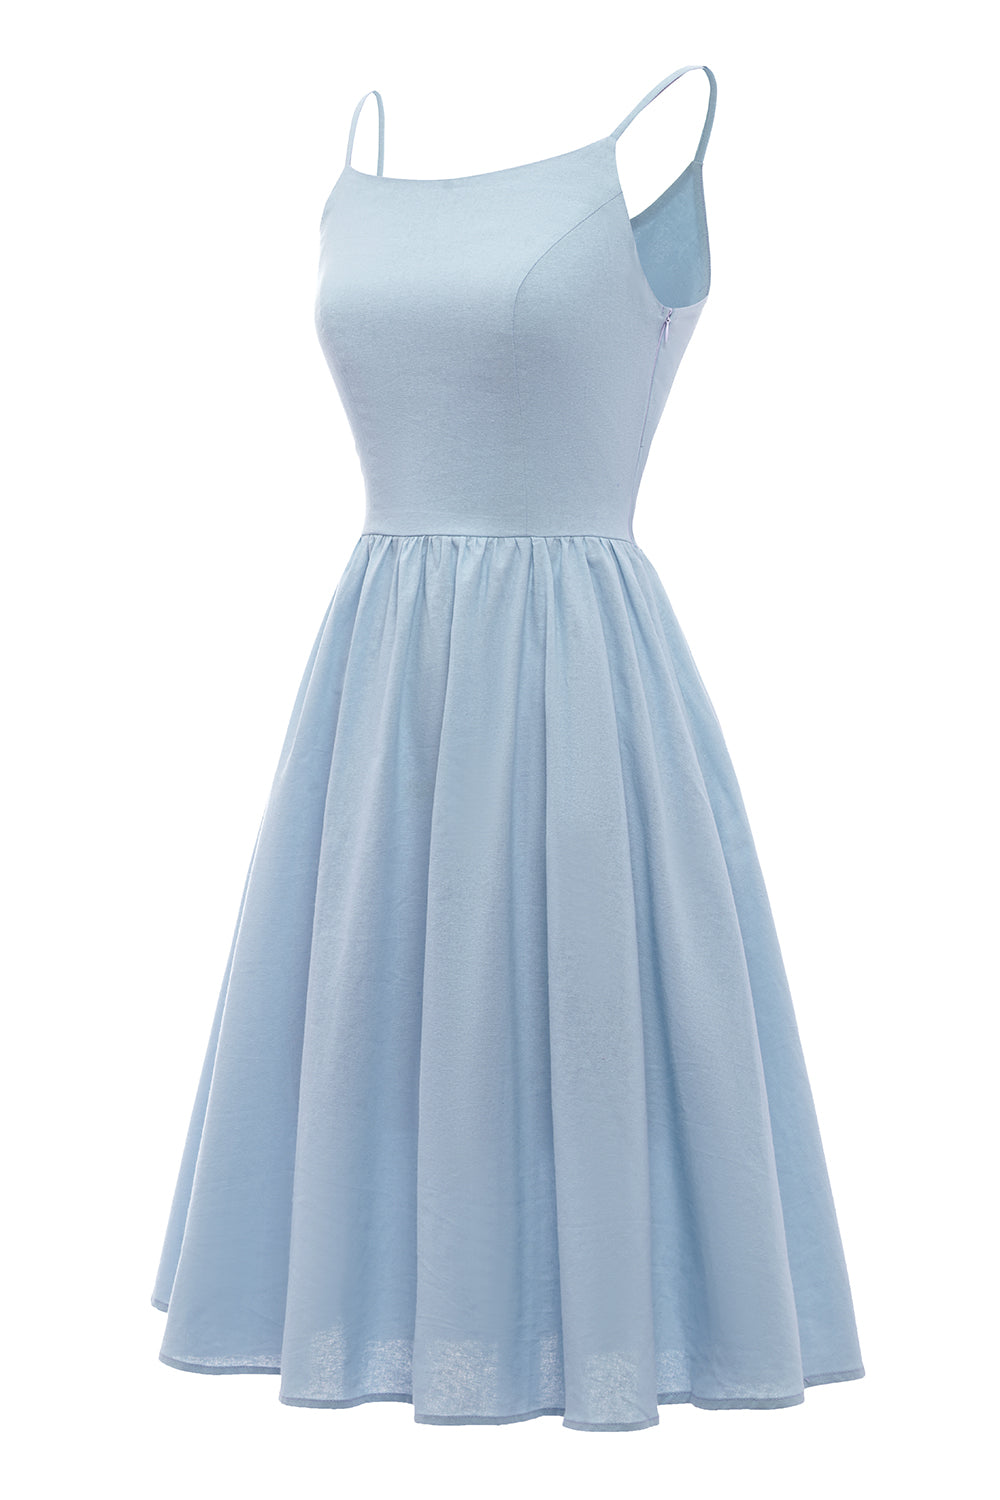 Spaghetti Straps Blue Summer Dress with Bowknot